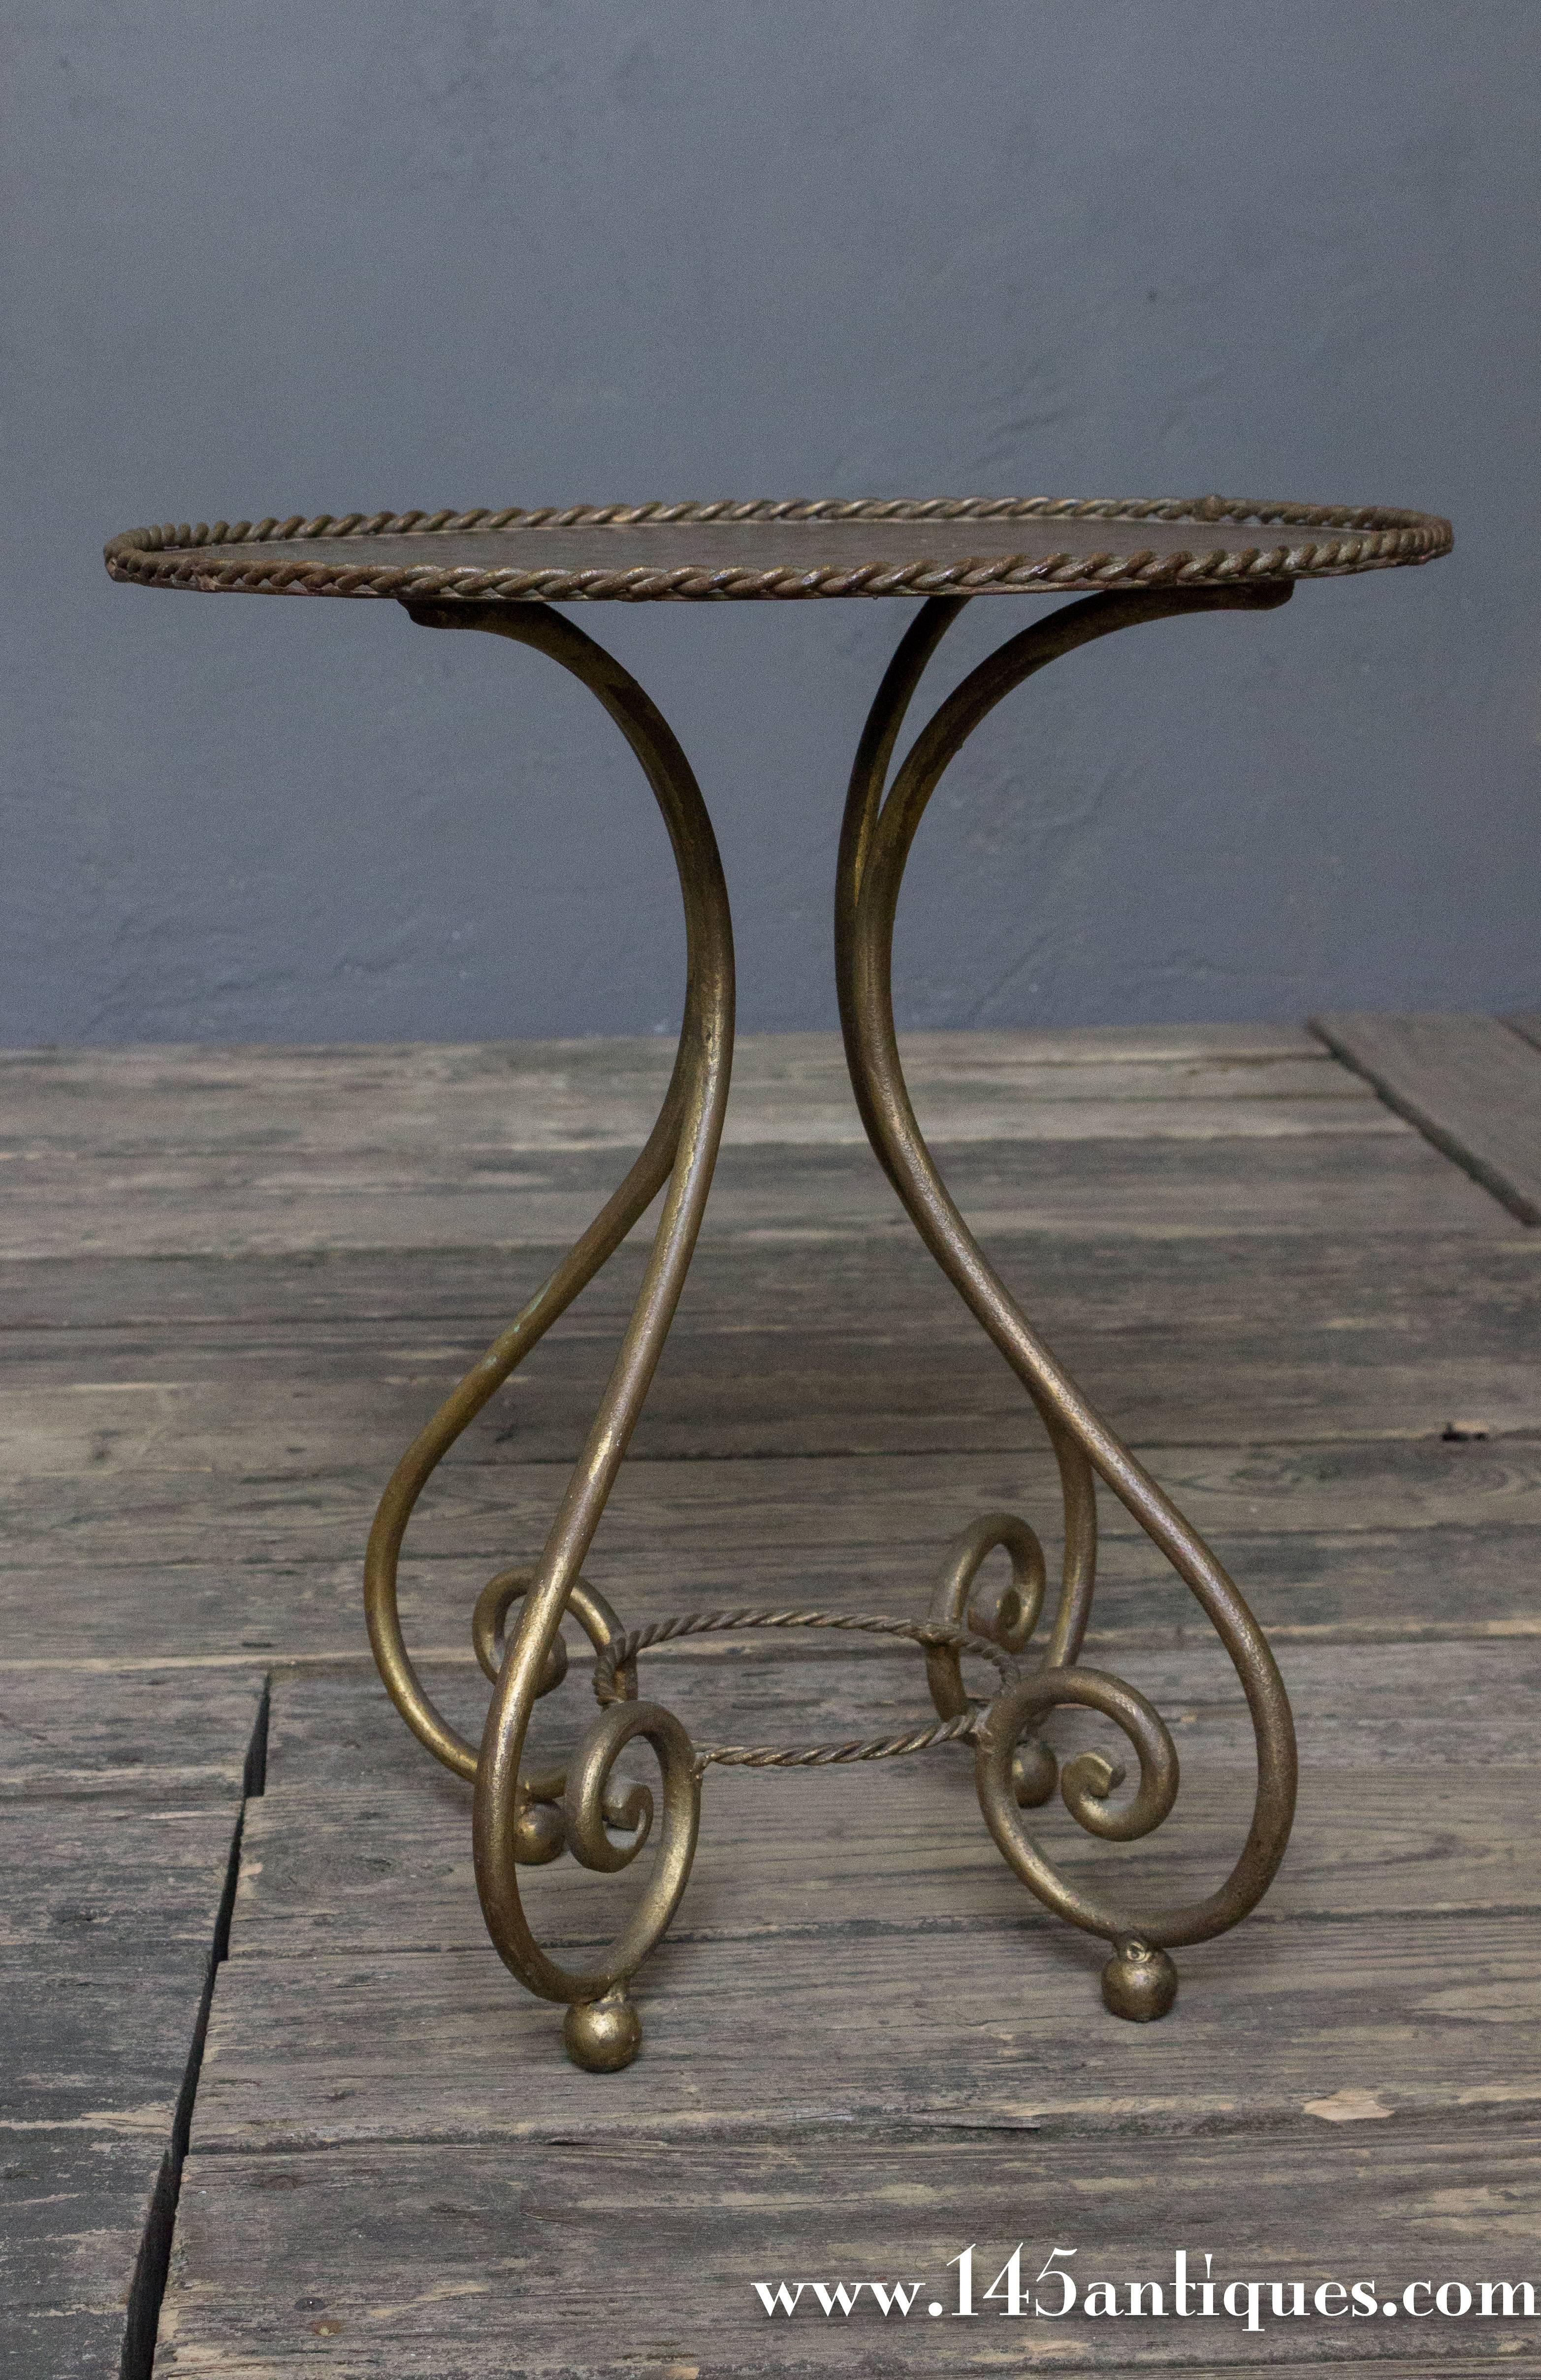 Spanish round gilt martini table with four scrolled legs and hammered top with braiding detail.